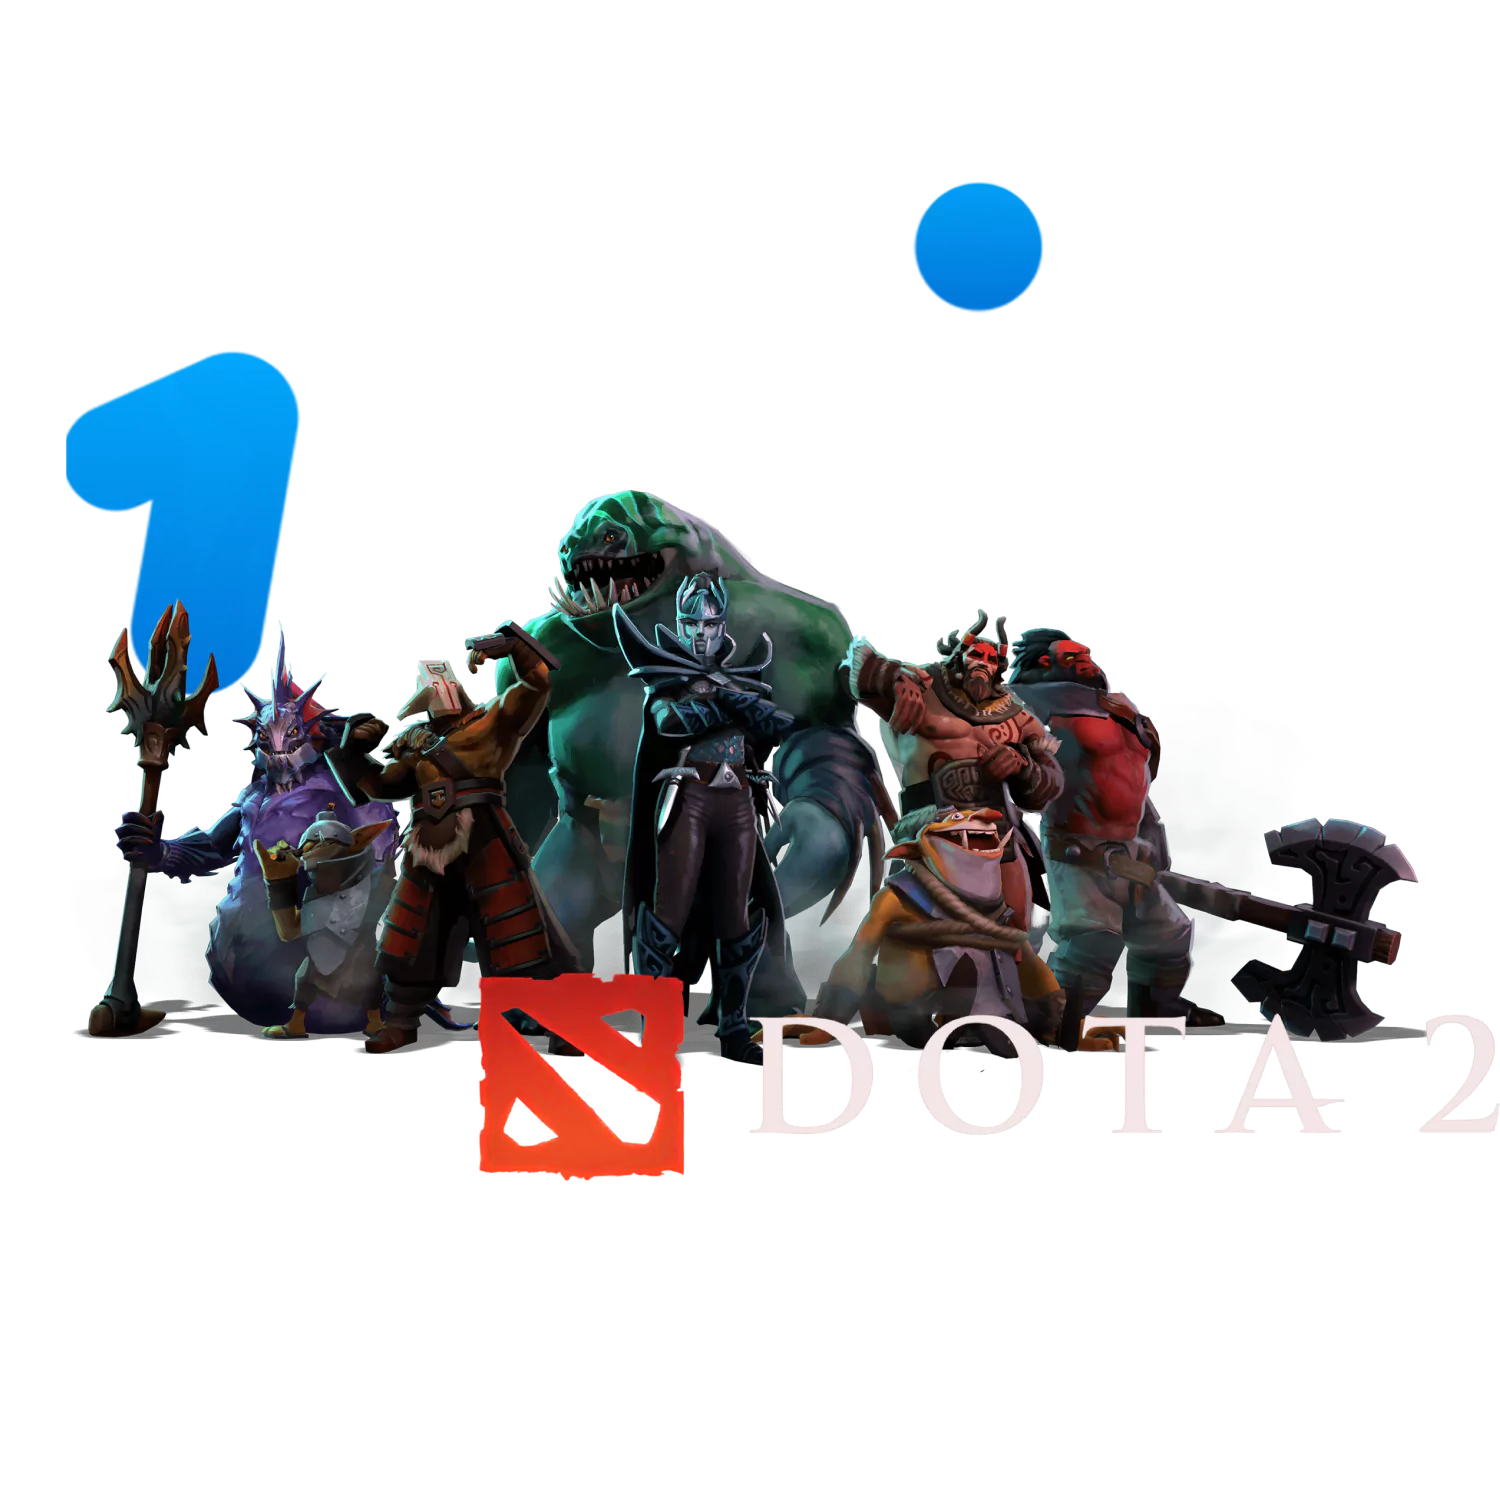 Learn how to bet on the Dota2 online matches with 1win.